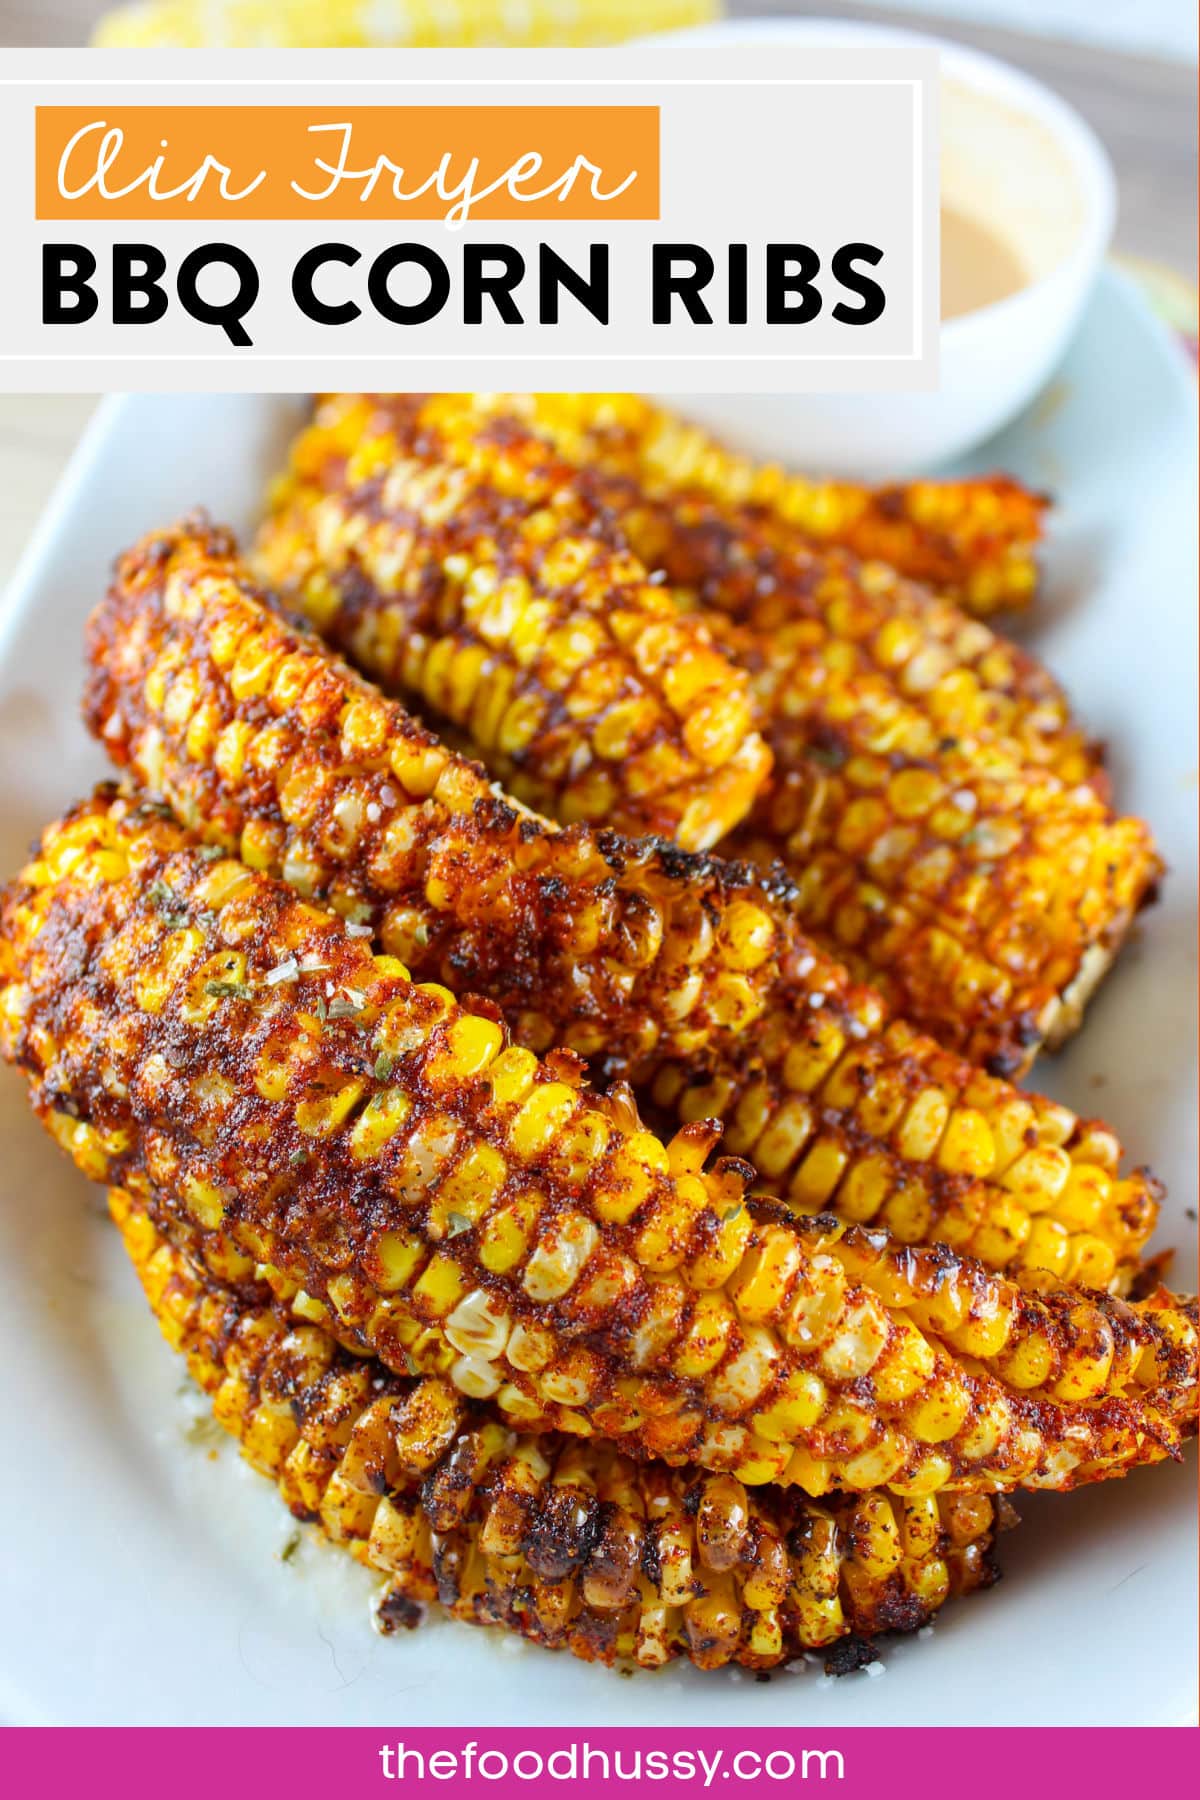 Corn Ribs in the Air Fryer are delicious whether you're snacking on them, serving as an appetizer or as a side dish! Sweet corn topped with barbecue seasoning and done in just 10 minutes in the air fryer! via @foodhussy